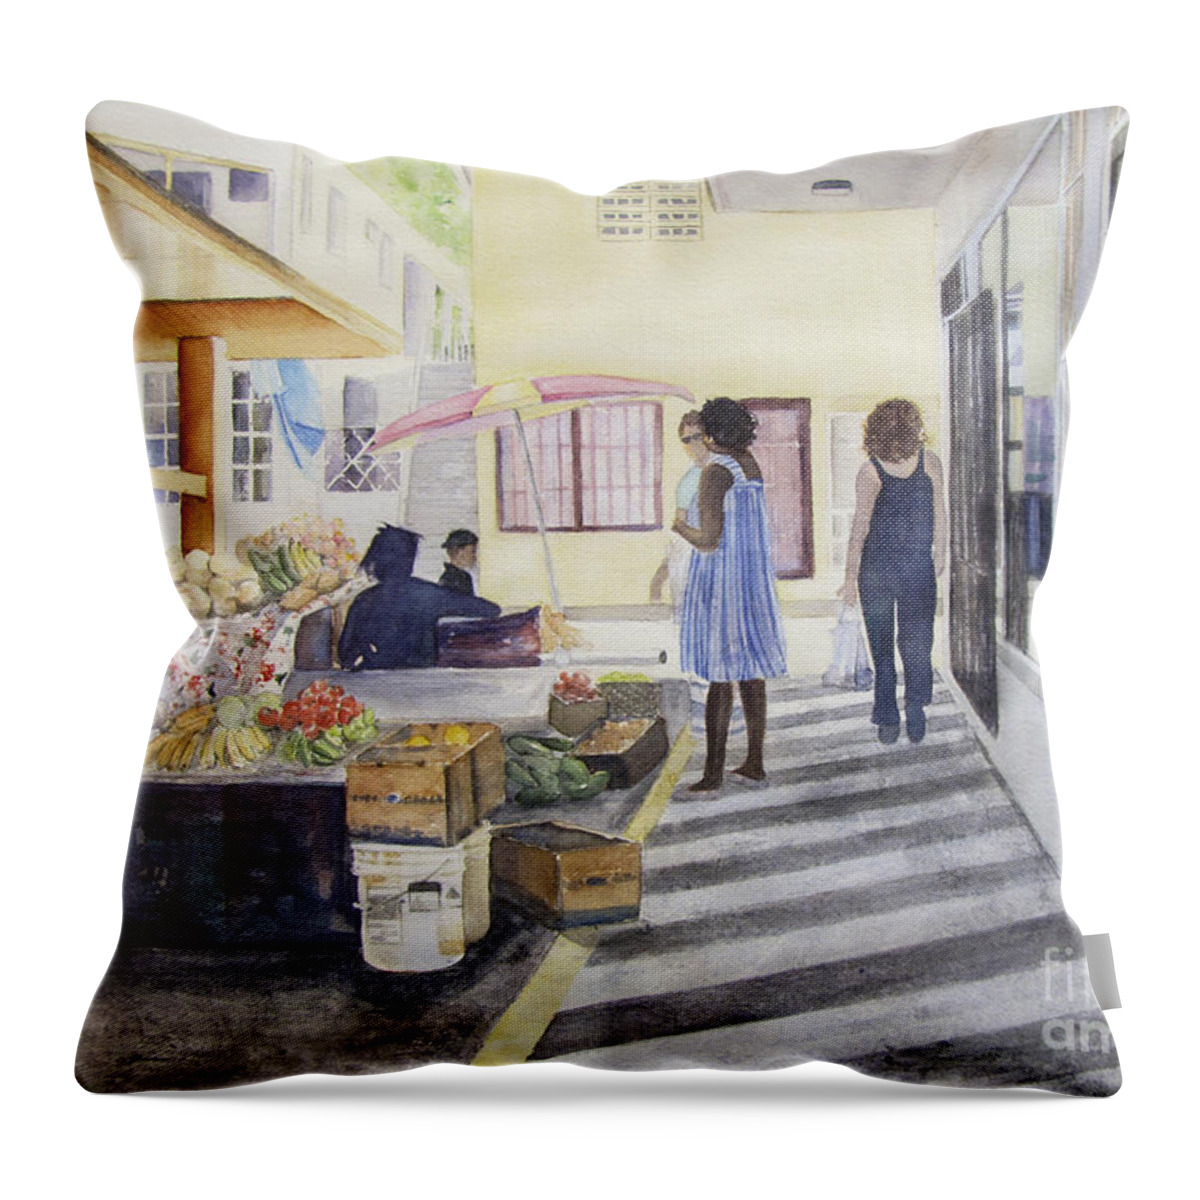 Original Watercolor Painting Throw Pillow featuring the painting St Martin Locals by Carol Flagg